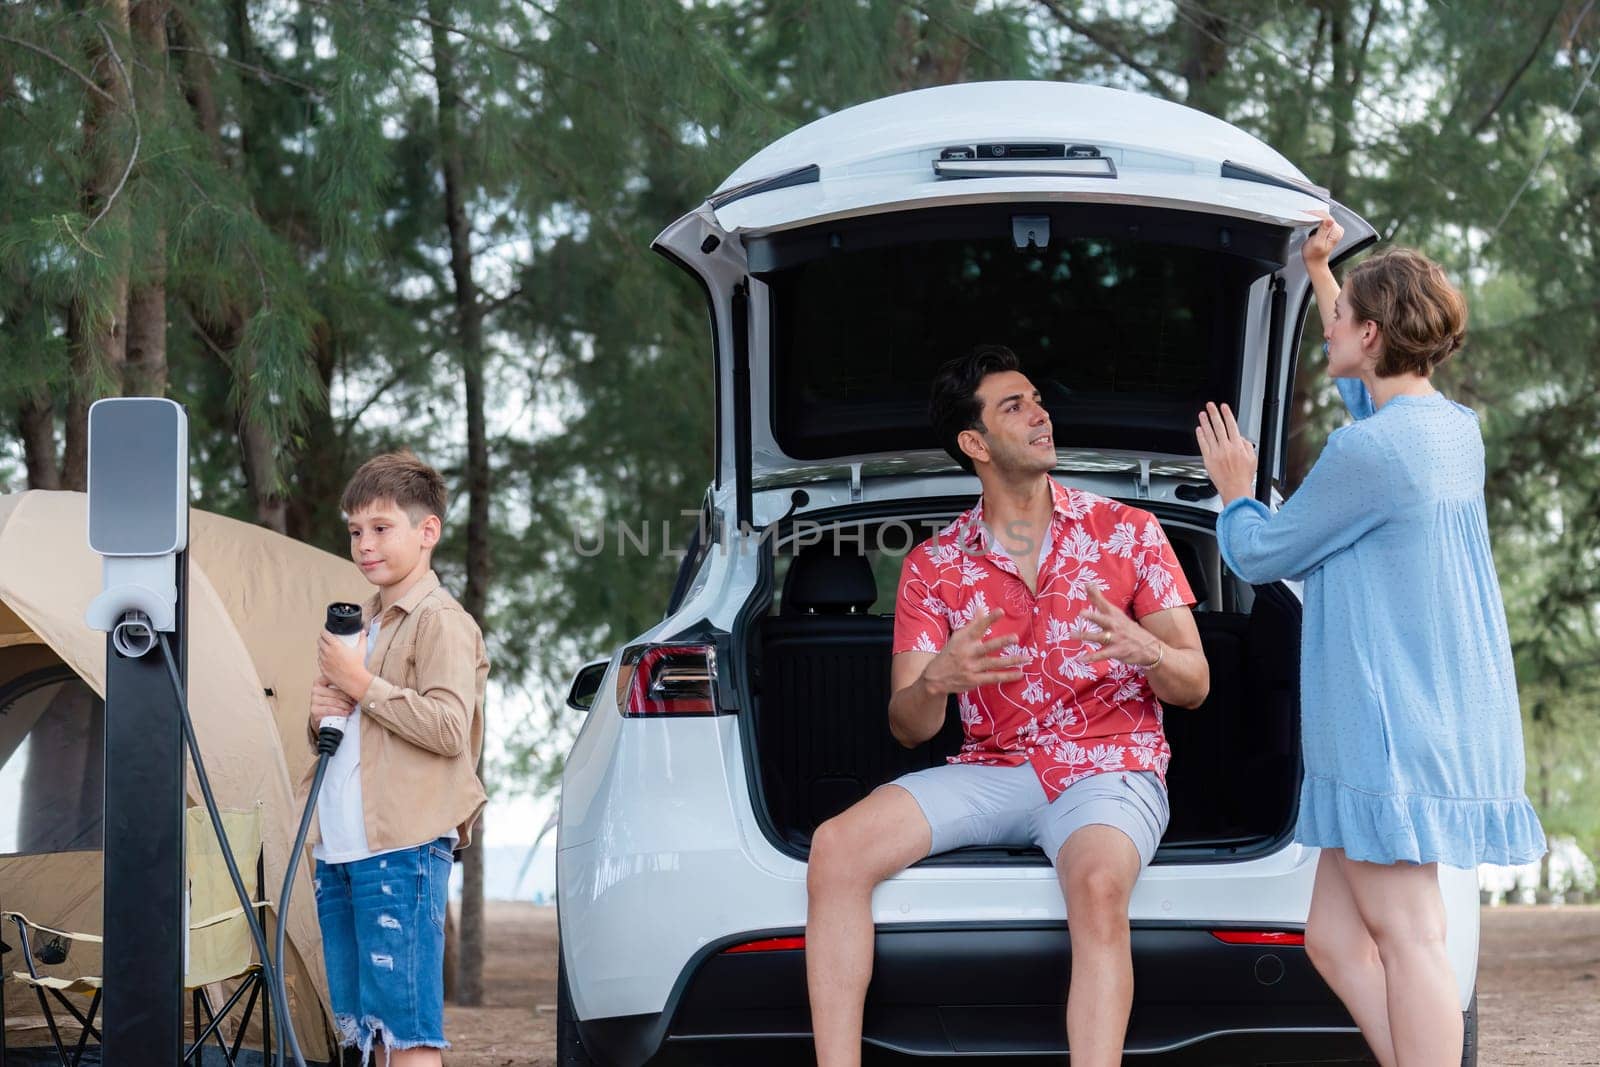 Outdoor adventure and family vacation camping in nature travel by eco friendly car for sustainable future. Lovely family recharge EV car with EV charging station in campsite. Perpetual